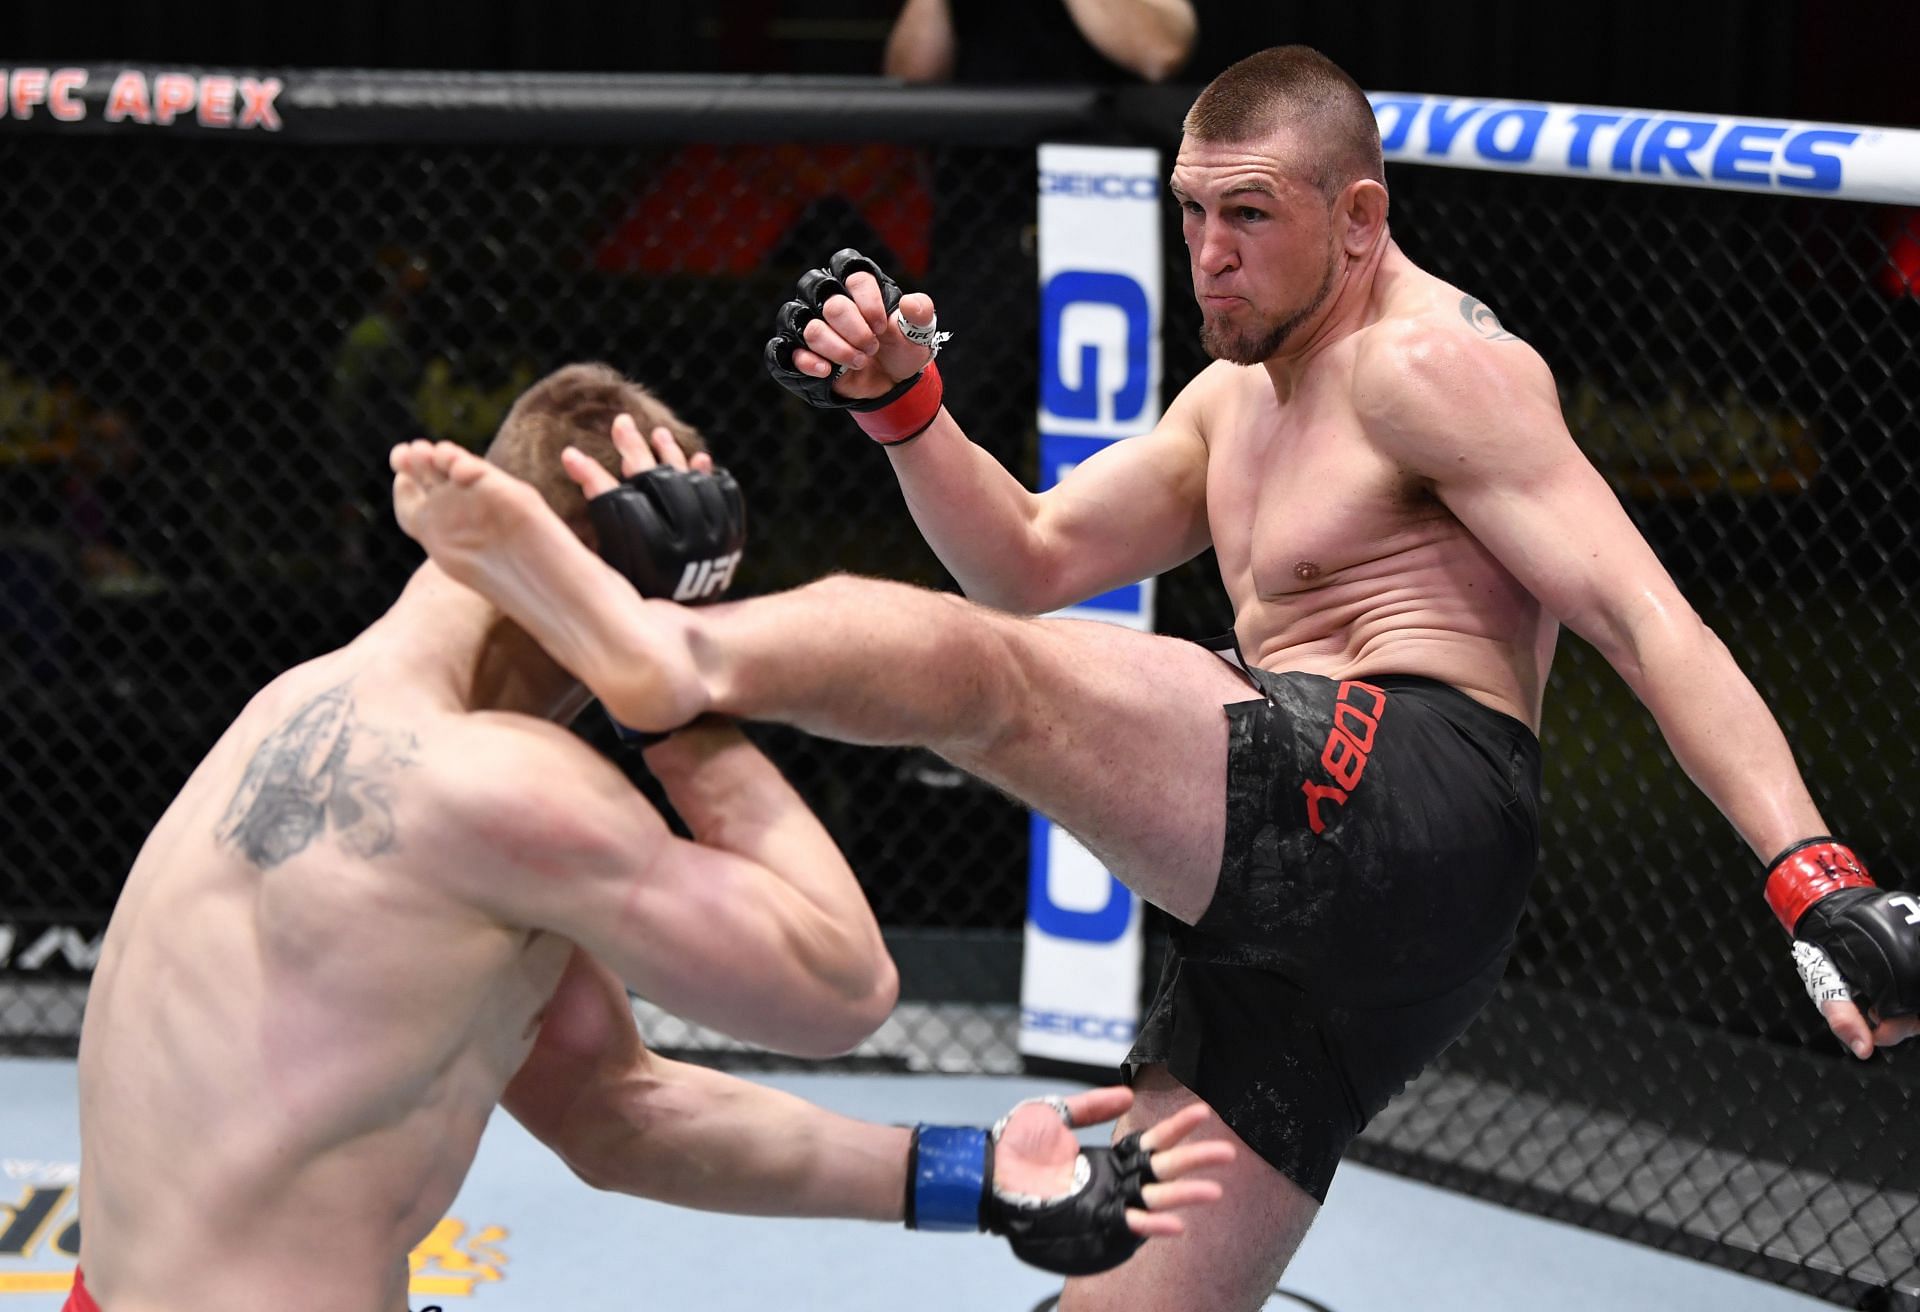 Dustin Jacoby probably saved his octagon career with his win last night